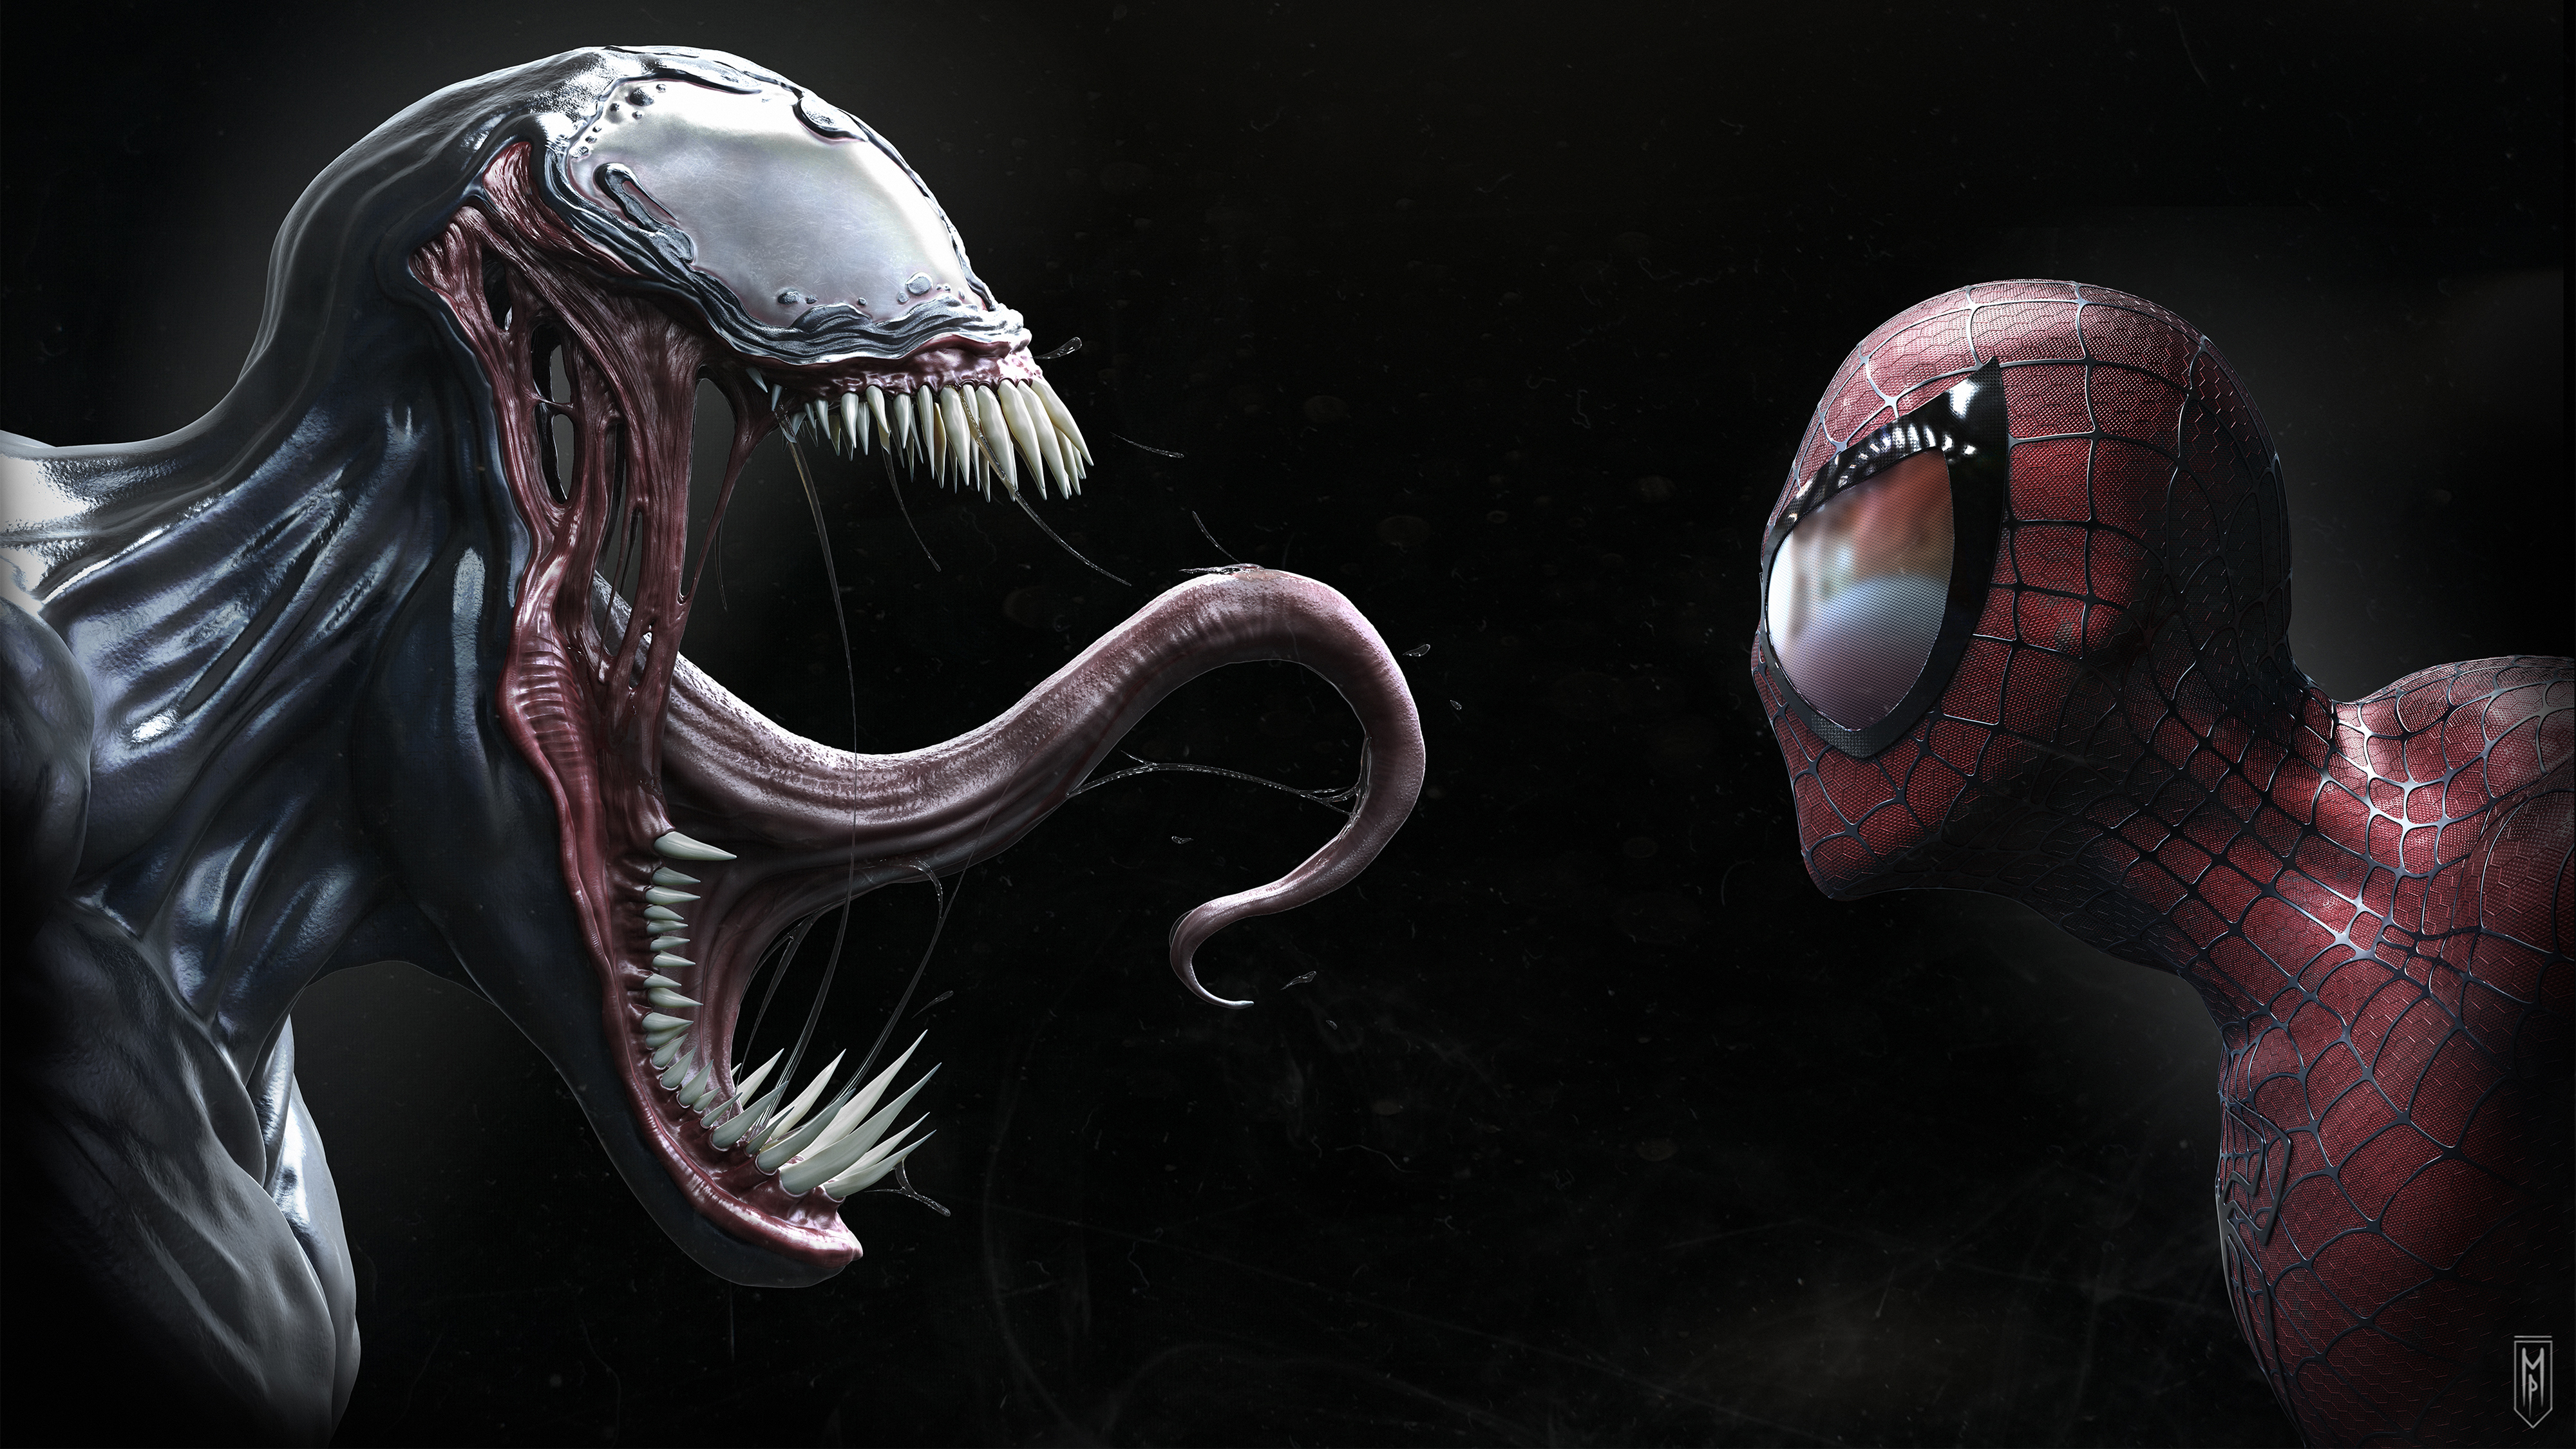 General 4000x2250 Symbiote Spider-Man Venom simple background tongue out Marvel Comics profile artwork black background creature Peter Parker face to face side view